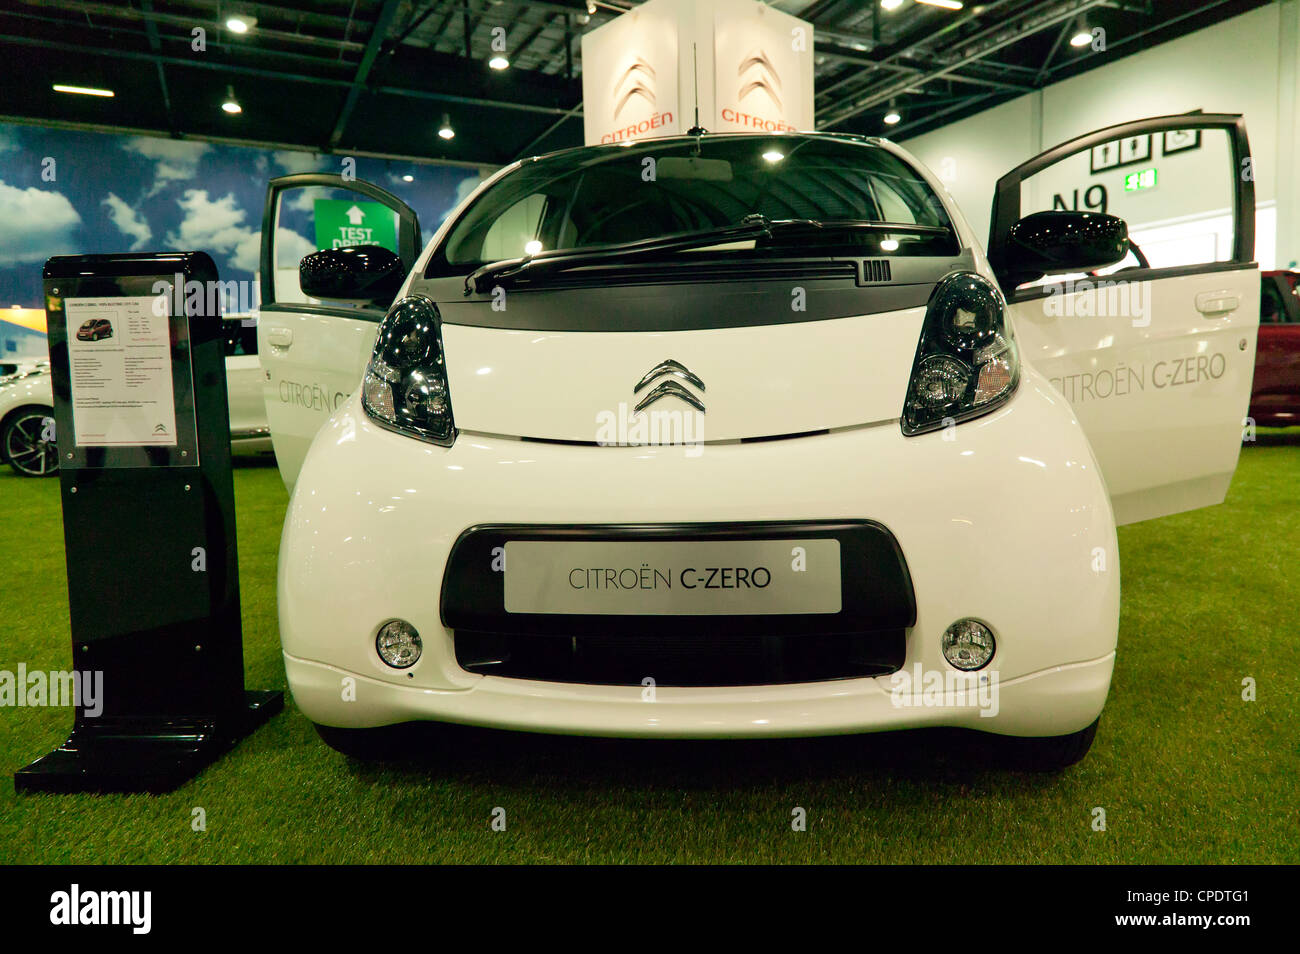 Front view of a Citroën C-Zero Hatchback electric car on display at ecovelocity 2012 Stock Photo